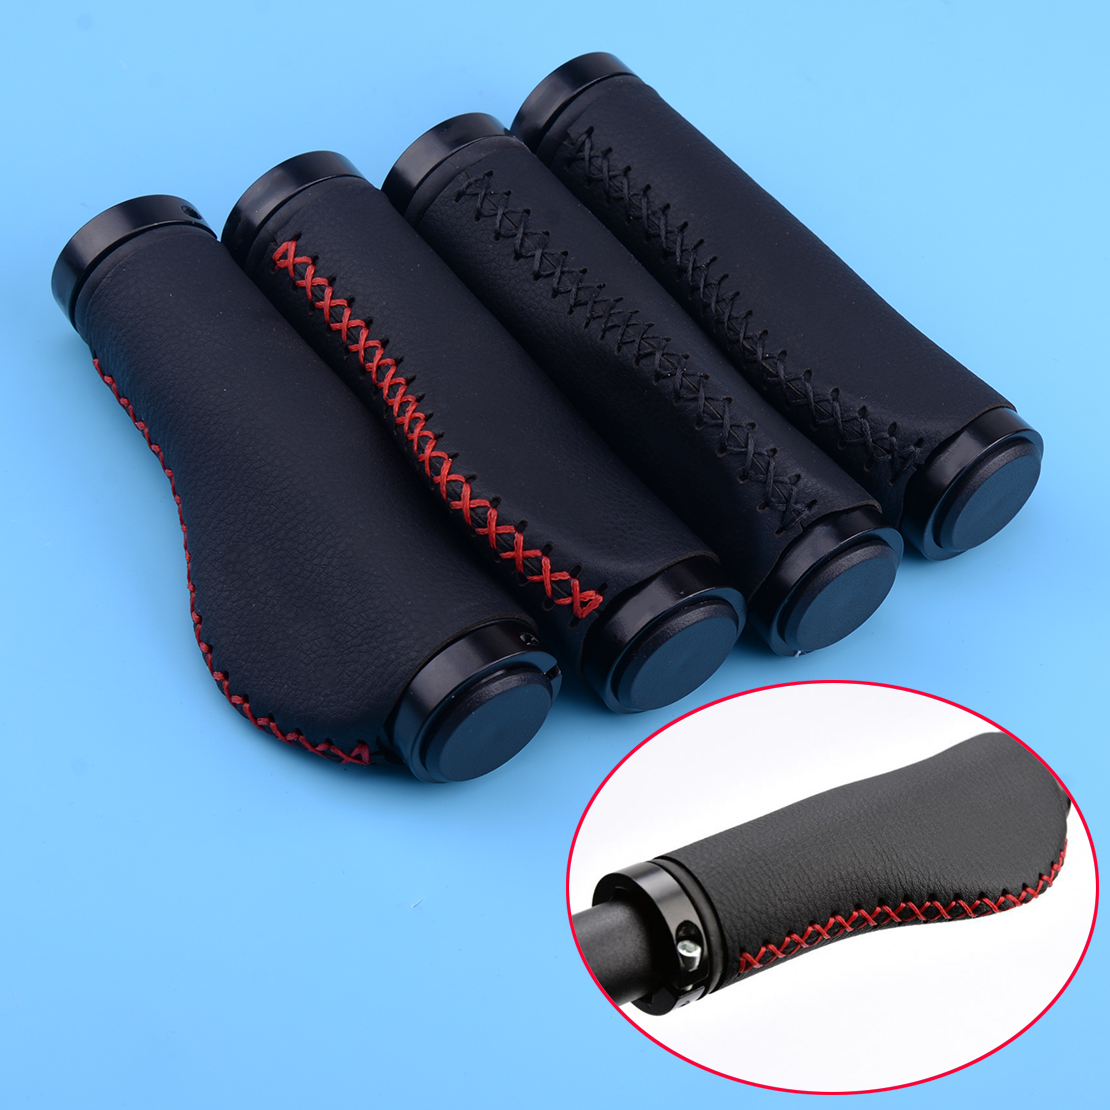 handle grips for bmx bikes